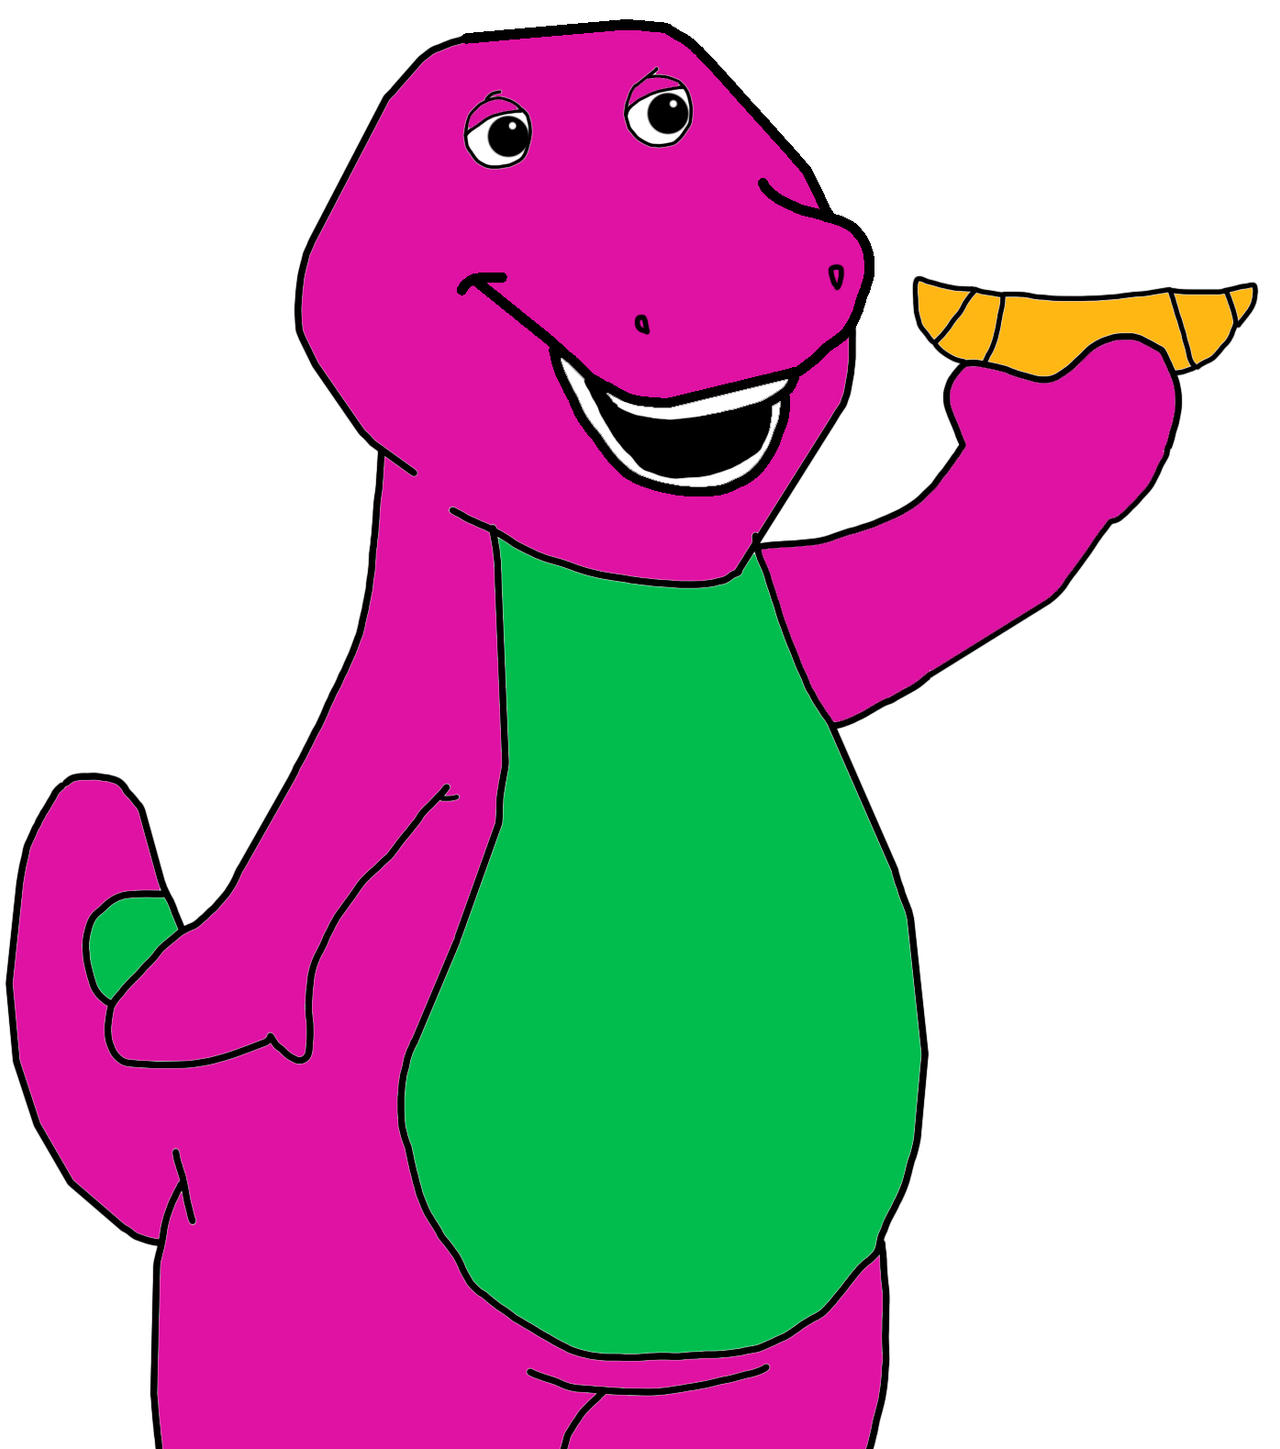 Barney with a Croissant by NicholasVinhChauLe on DeviantArt